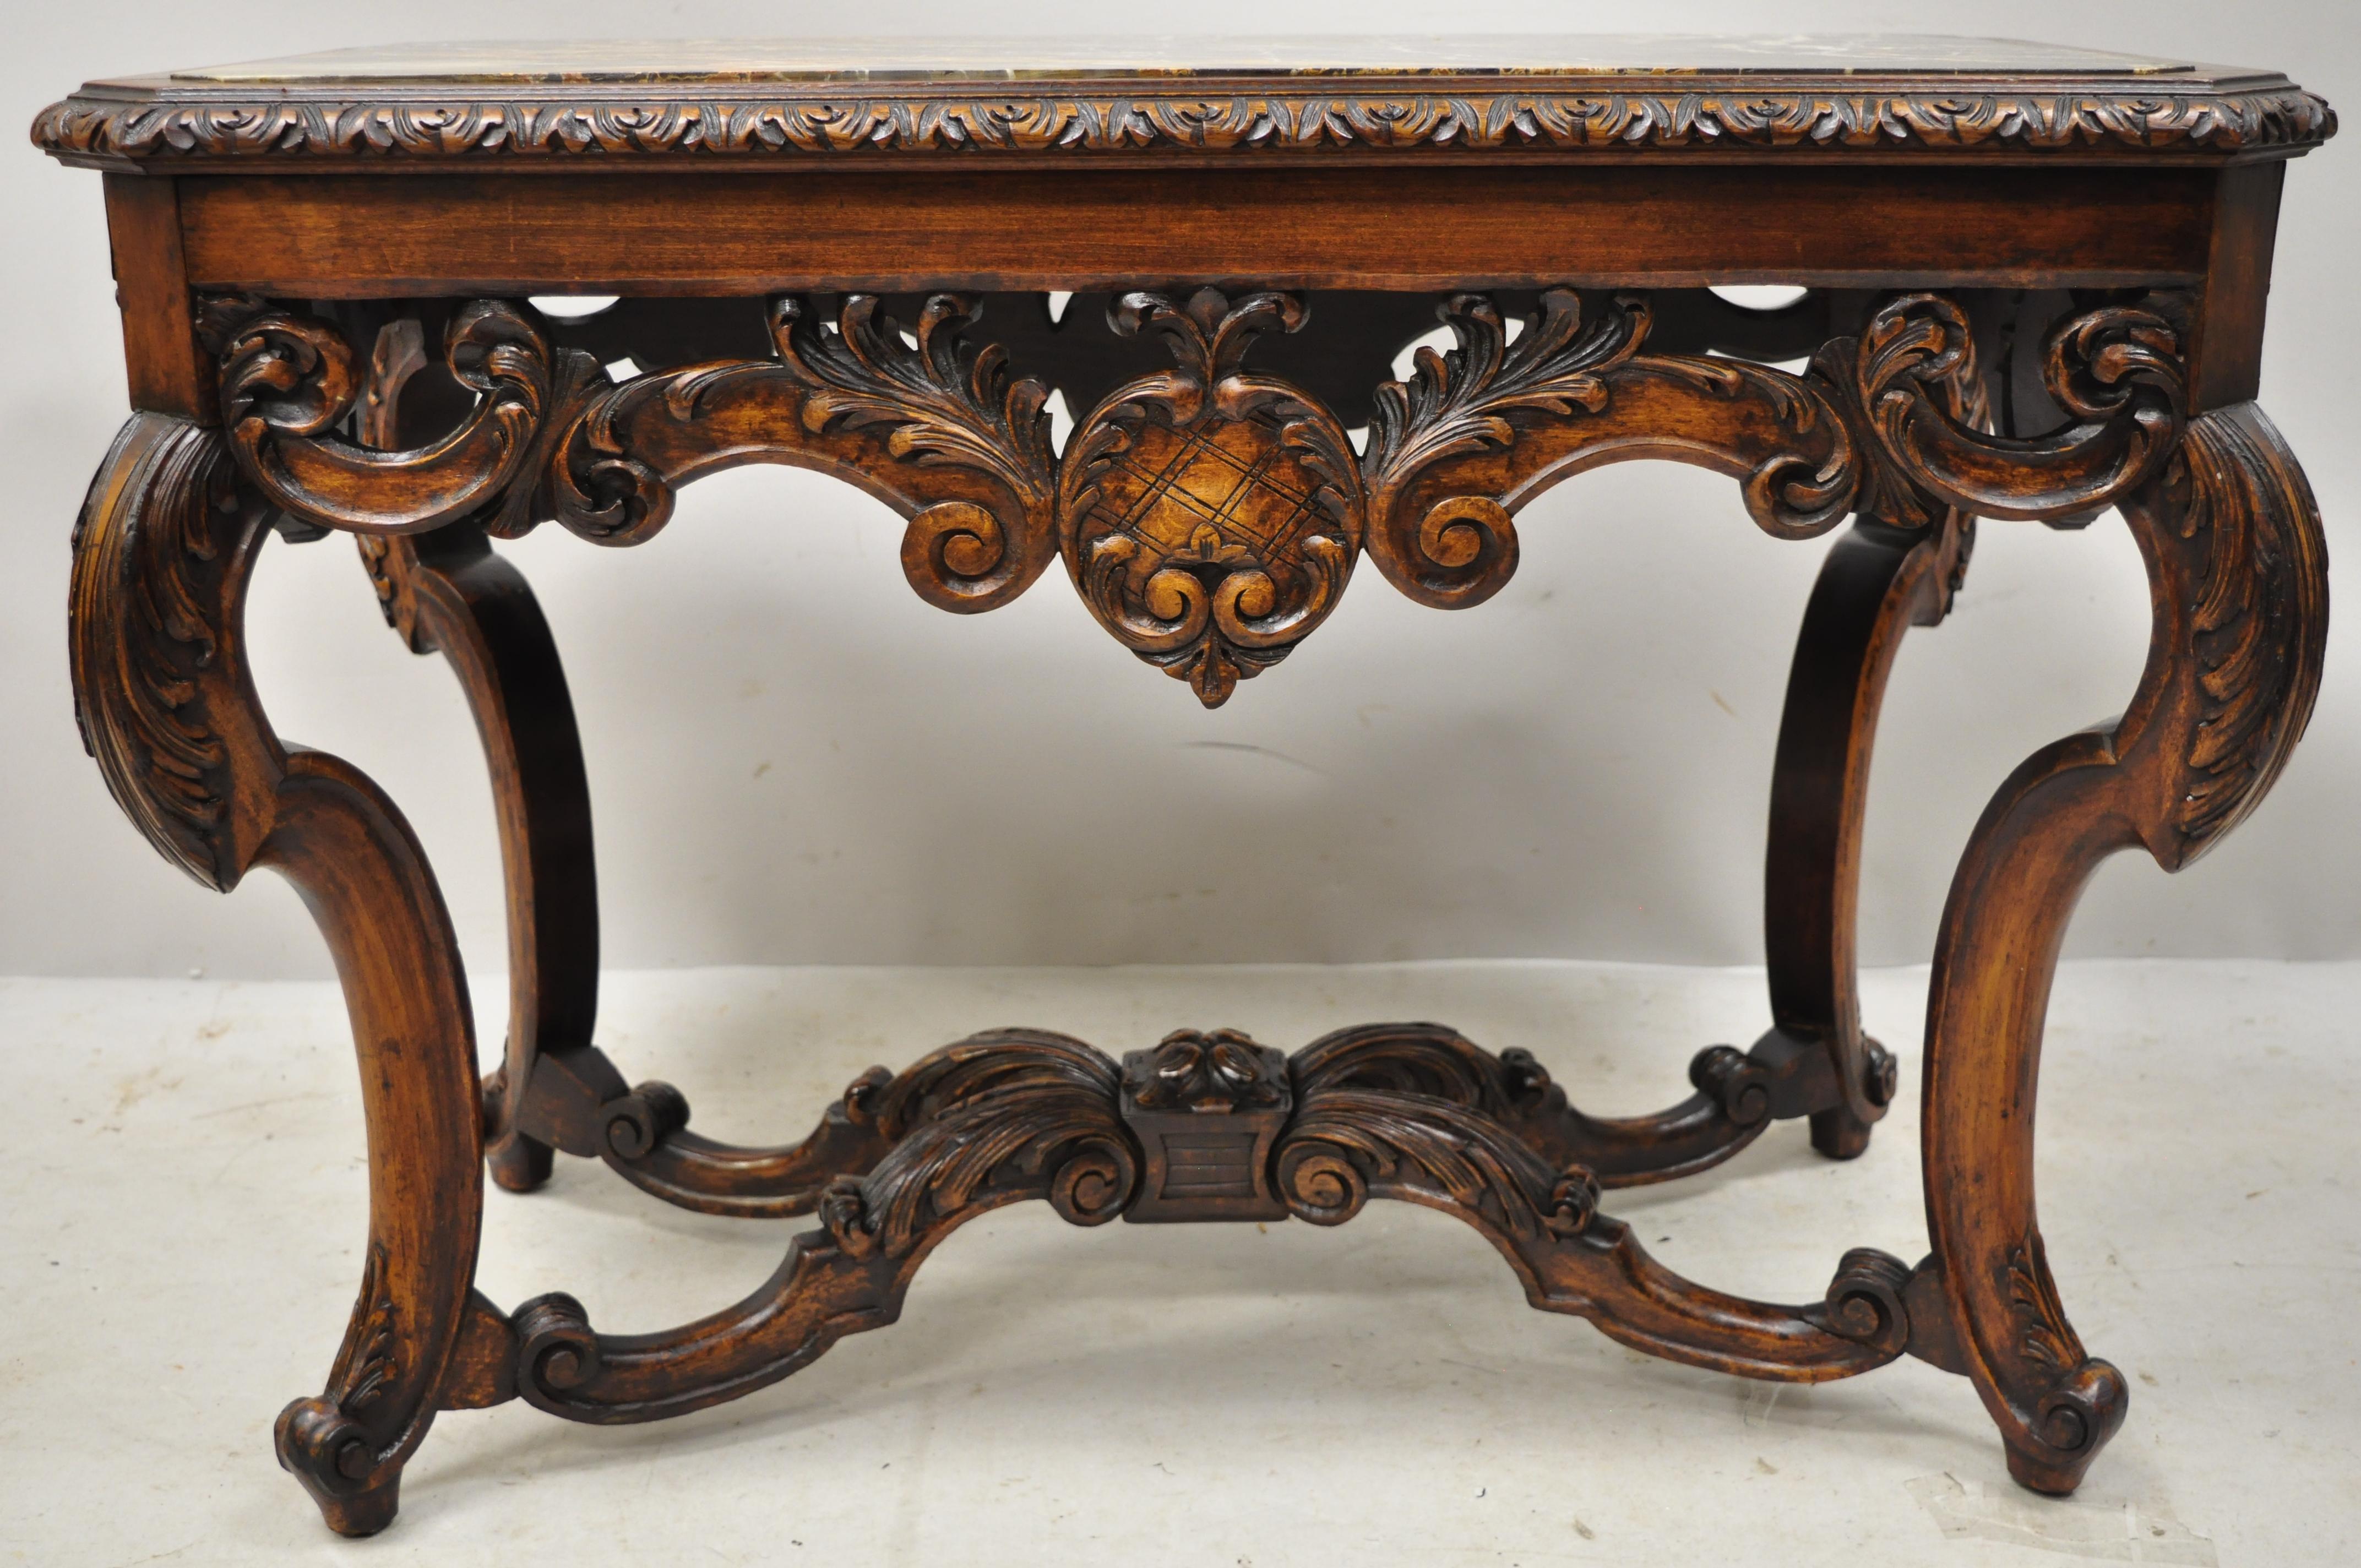 Antique French Louis XV Baroque style carved walnut marble-top small coffee table. Item features a black marble top, ornate scrollwork carved skirt, stretcher base, solid wood construction, beautiful wood grain, nicely carved details, very nice